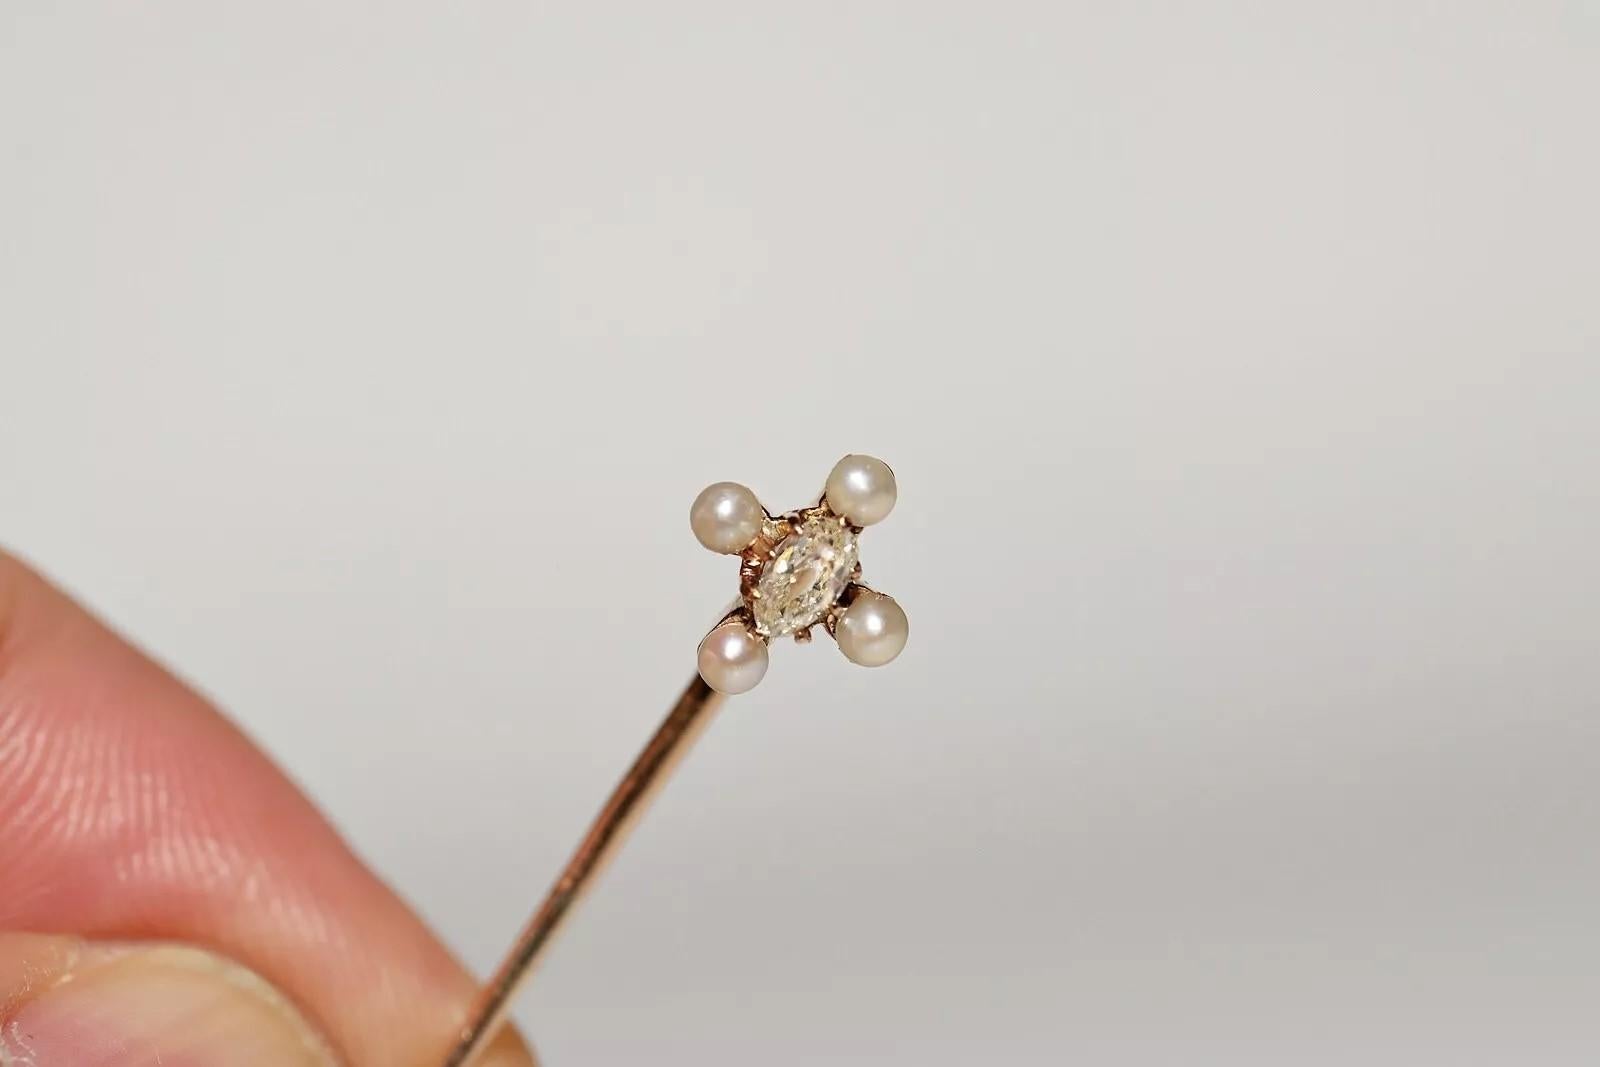 Antique Circa 1900s 18k Gold Natural Old Cut Diamond And Pearl Brooch In Good Condition For Sale In Fatih/İstanbul, 34